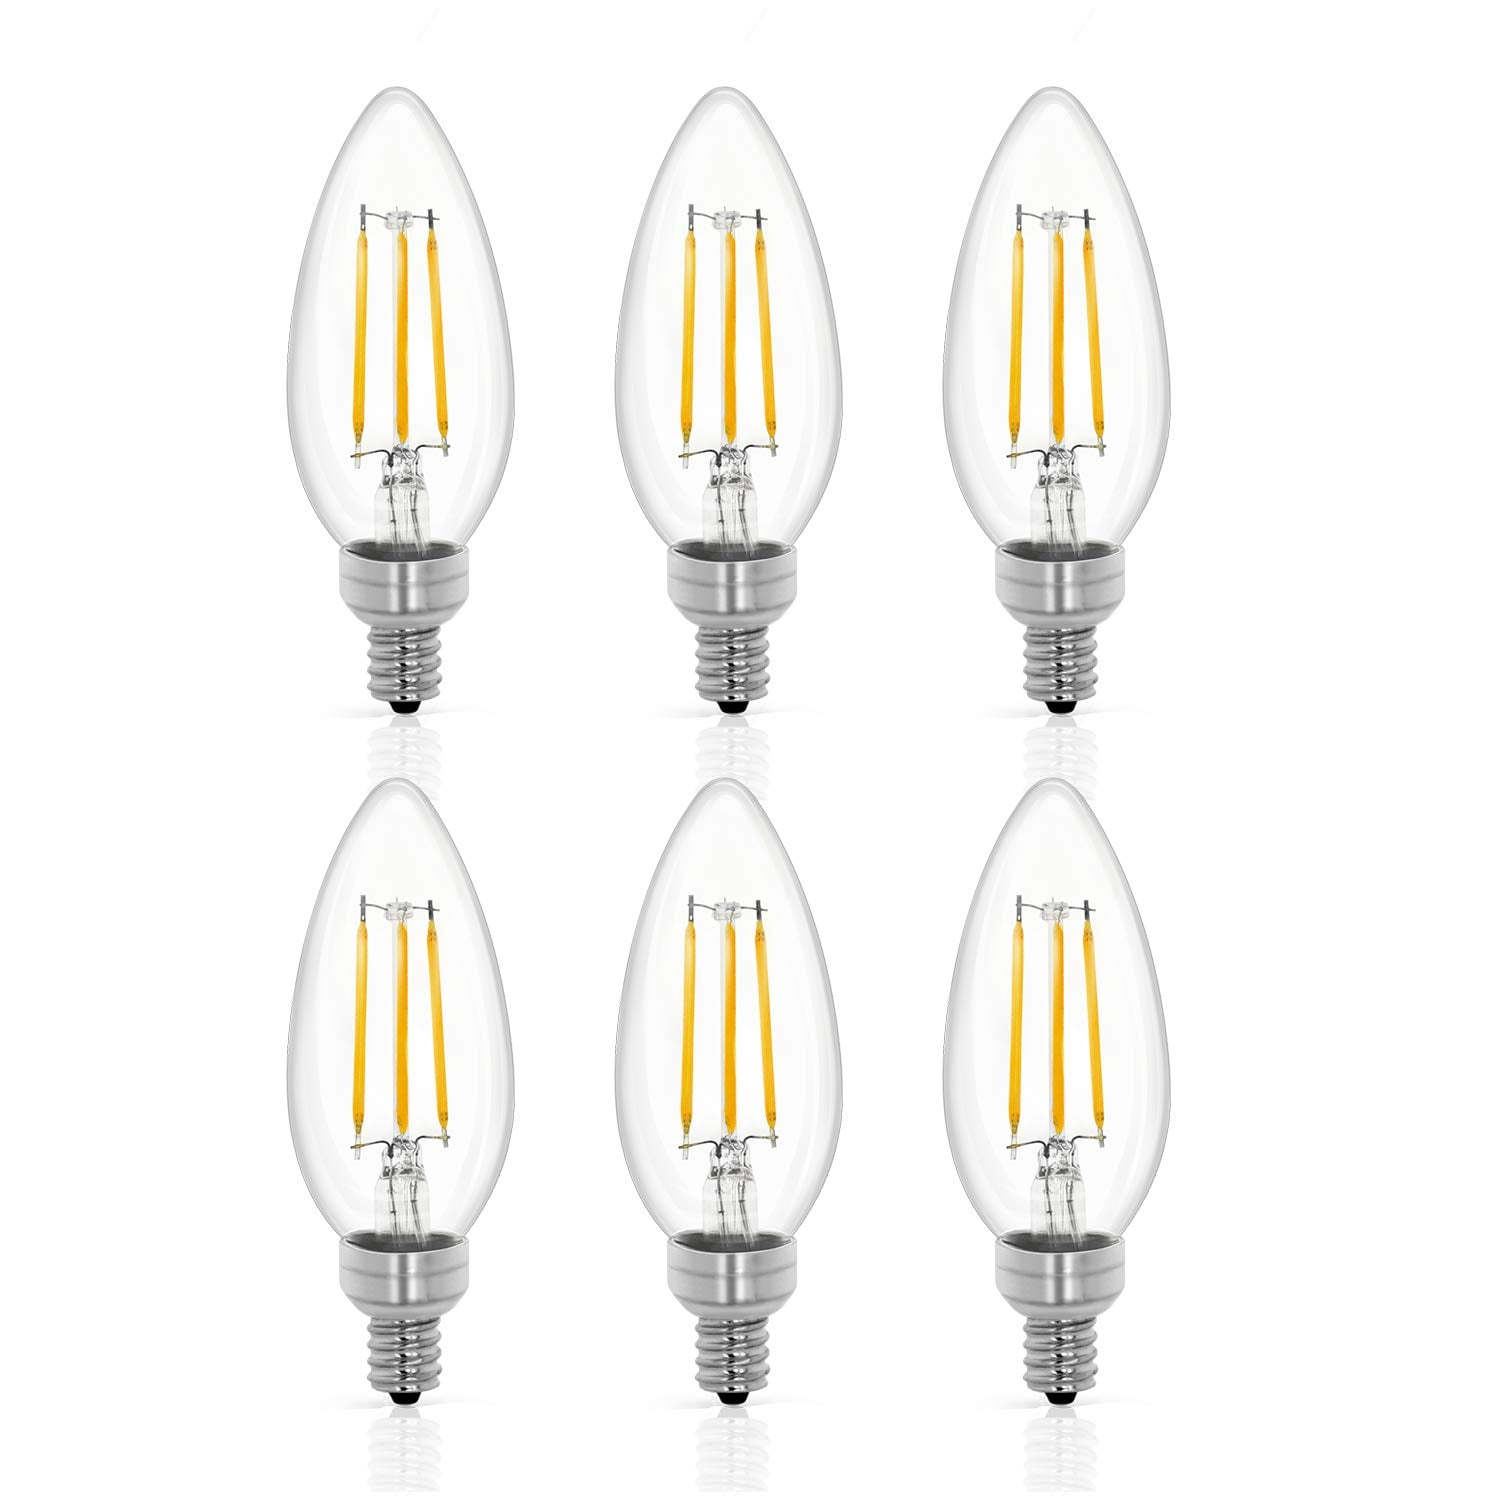 5000K Daylight LED Light Bulbs A15,6W Led Candelabra Bulb for Chandelier,Non-Dimmable,60W Halogen Equivalent,420lm,Pack of 6 WEIPIN E12 LED Ceiling Fan Light Bulb 